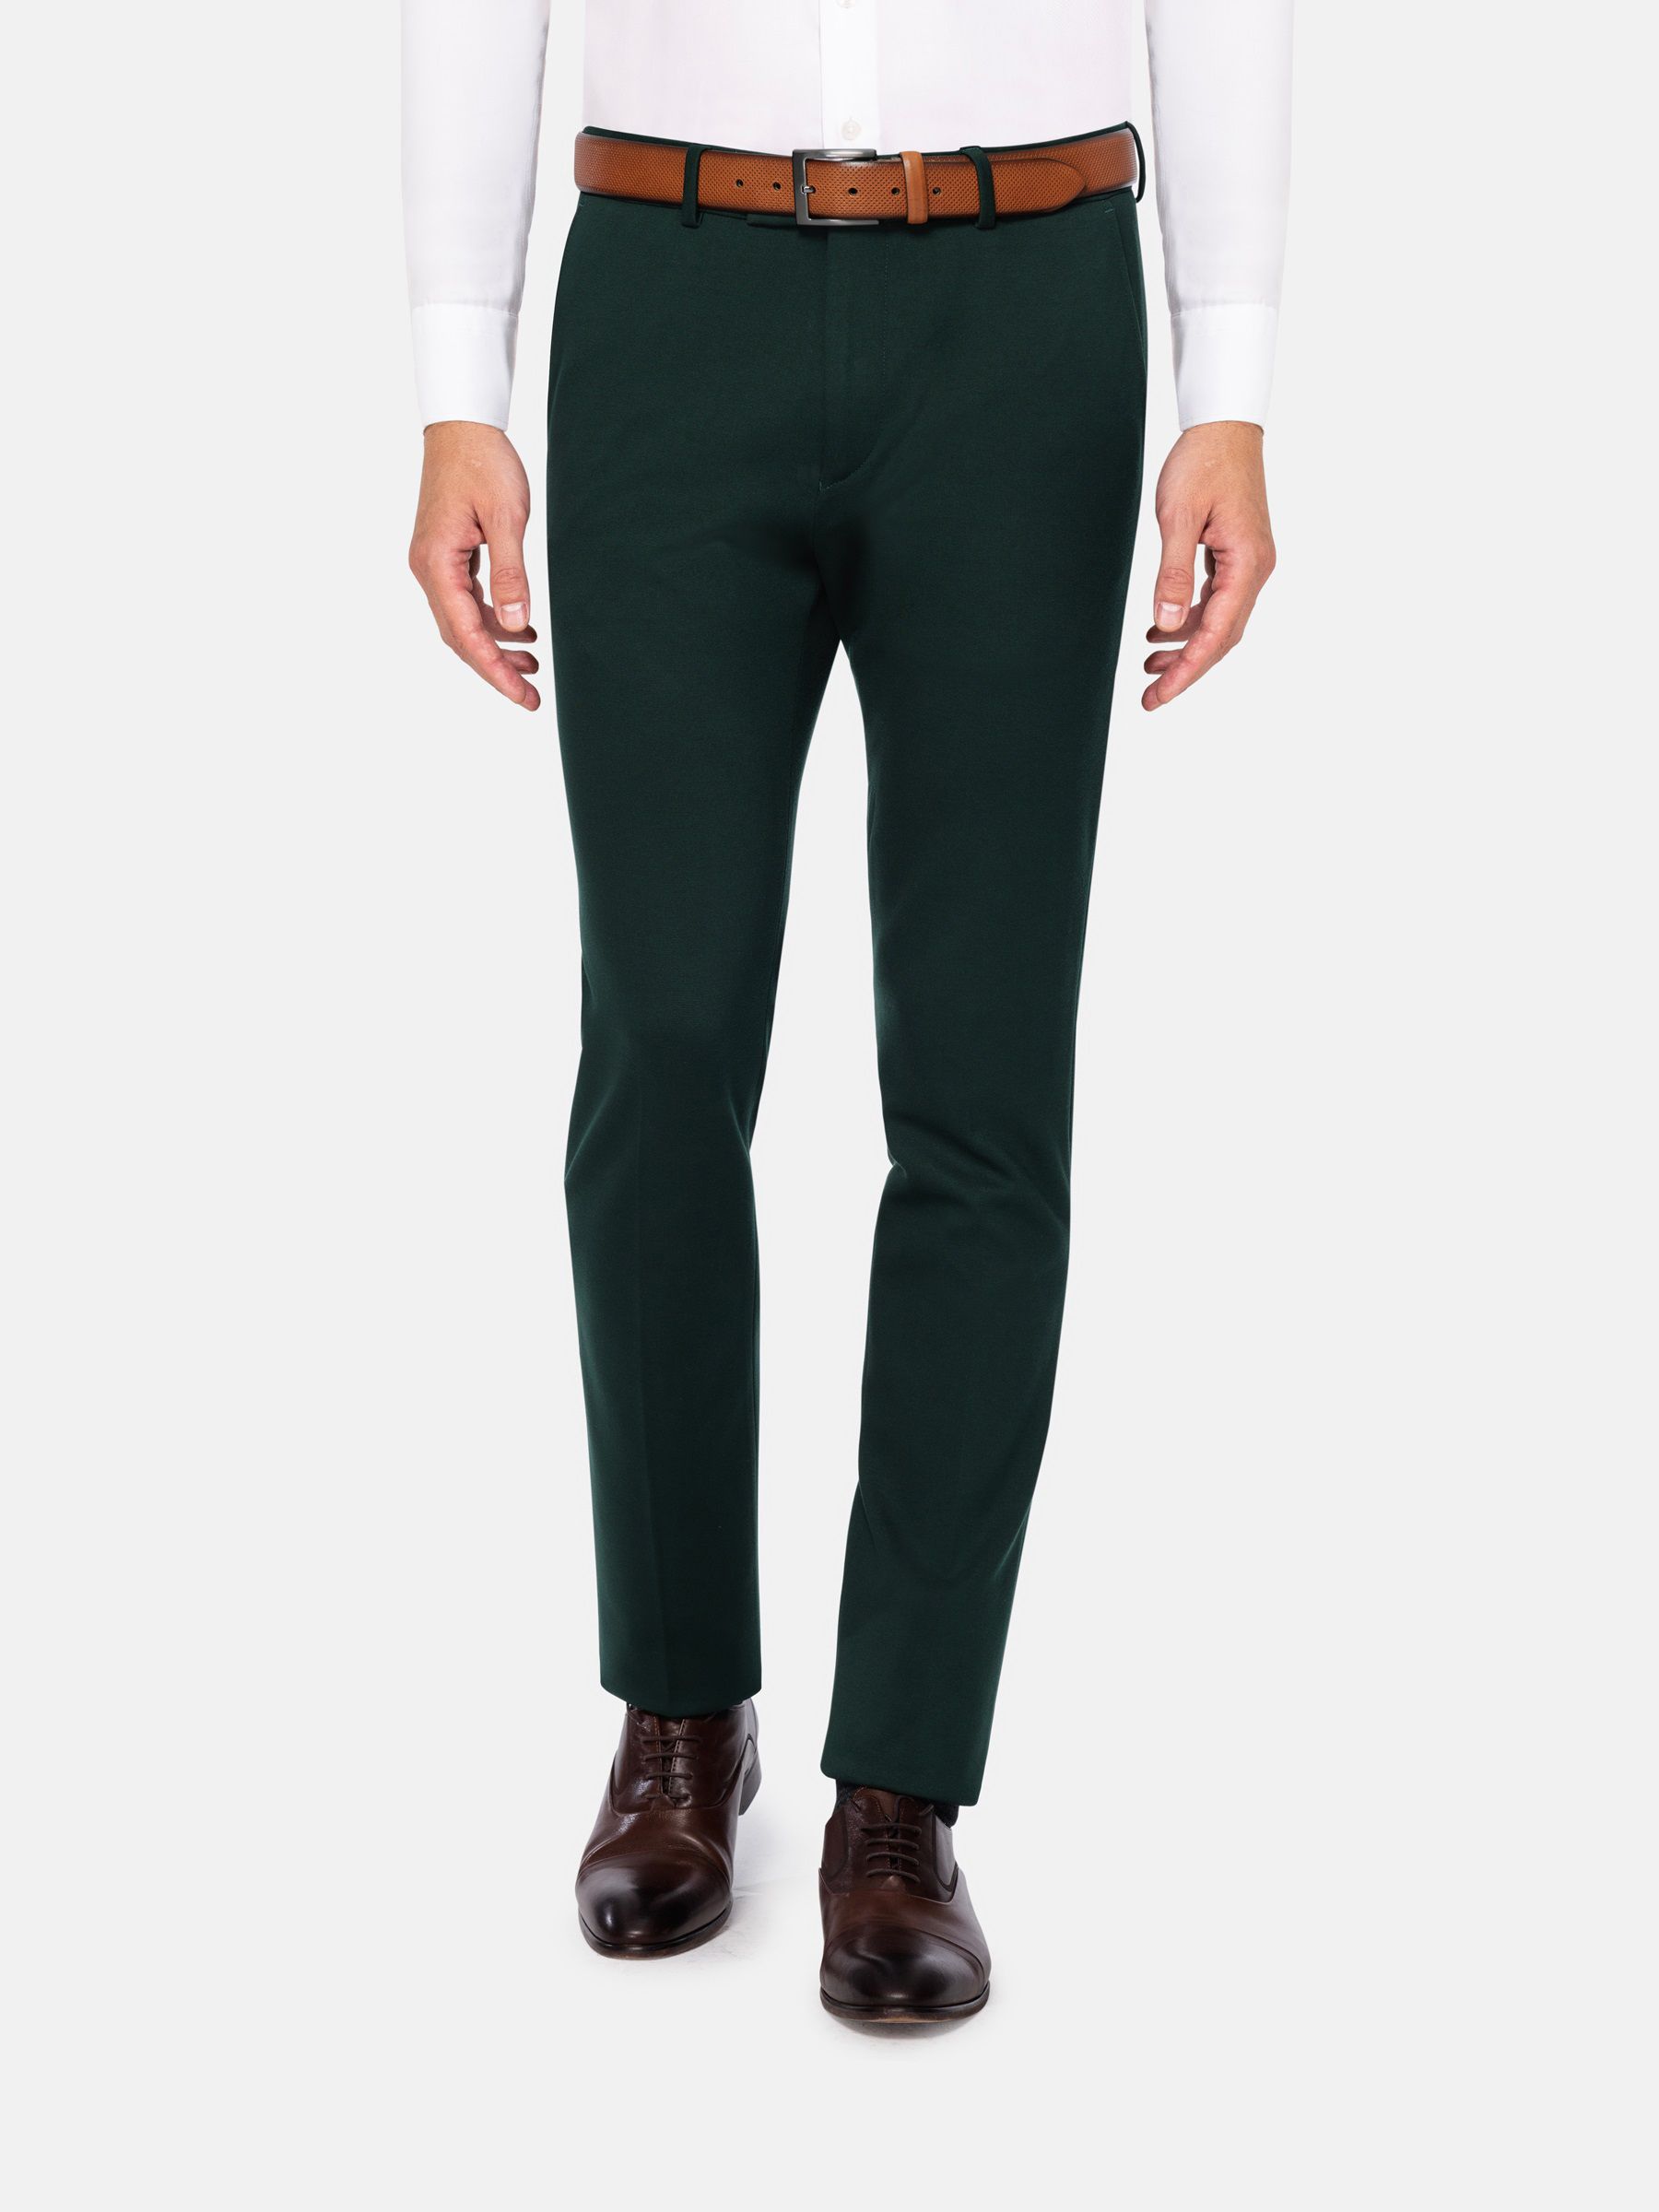 Buy Blue Slim Fit Formal Suit Trousers Online at SELECTED HOMME |276492501